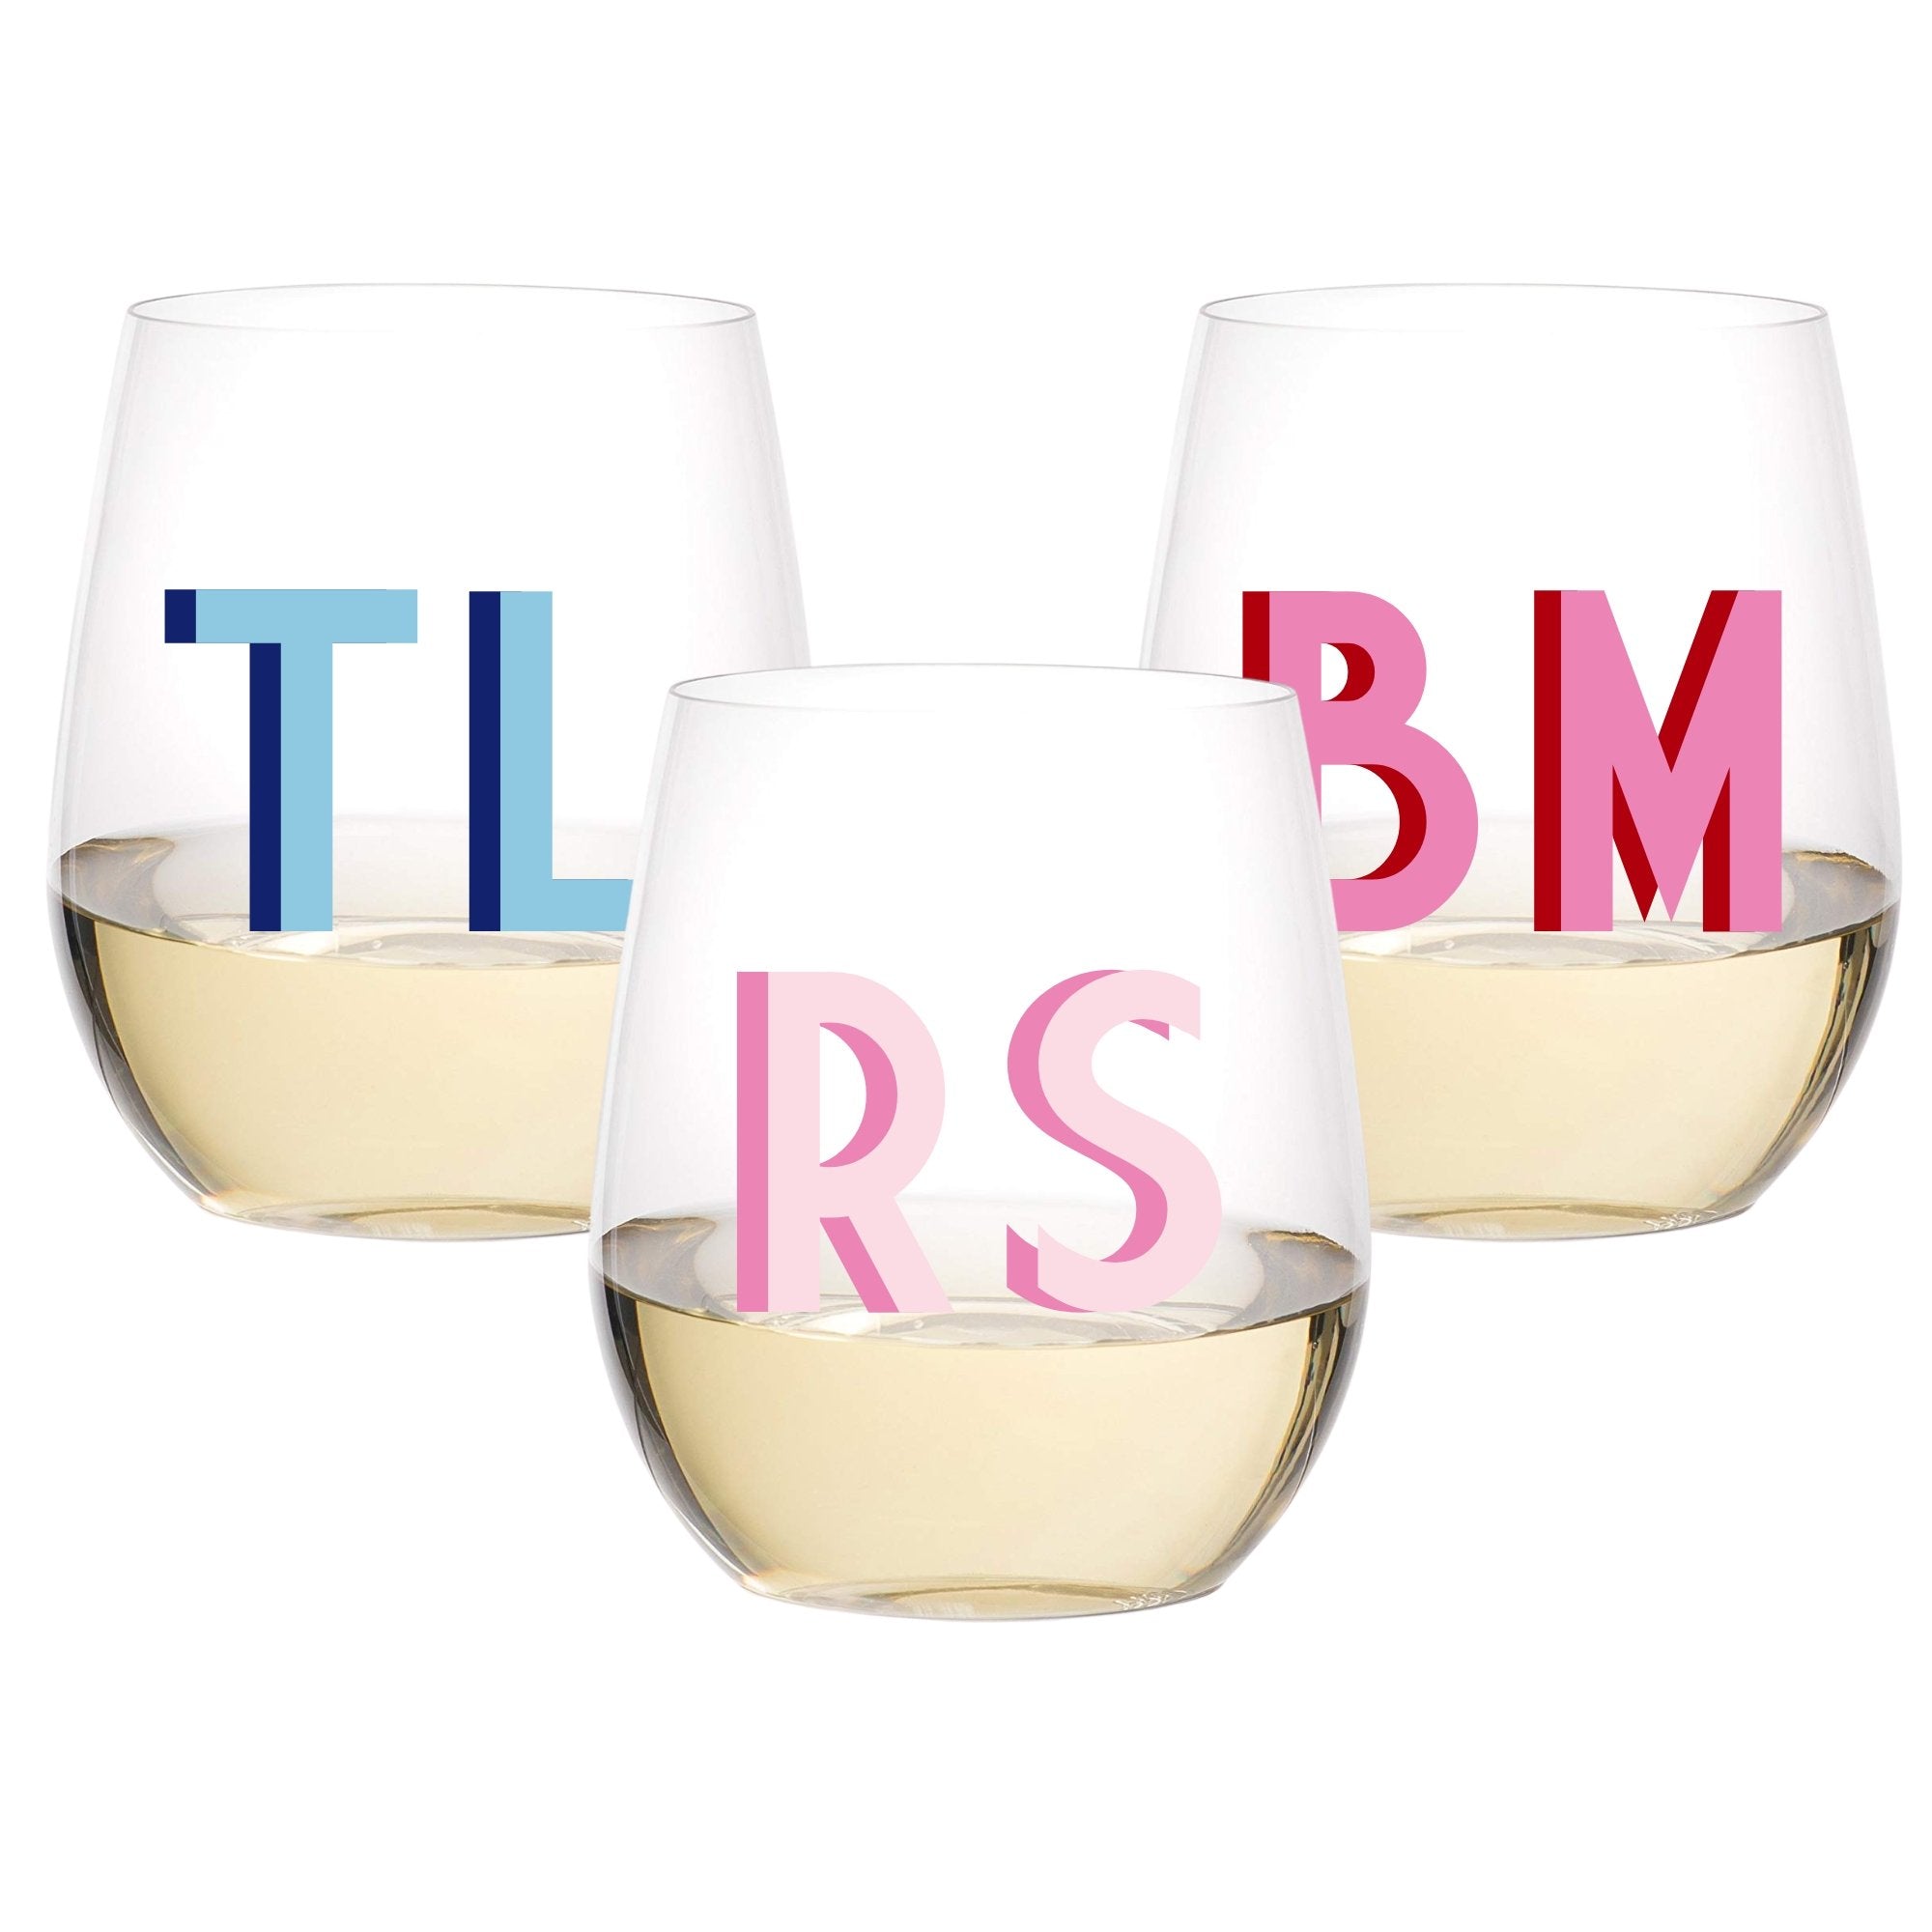 Customized Drinkware - Sprinkled With Pink